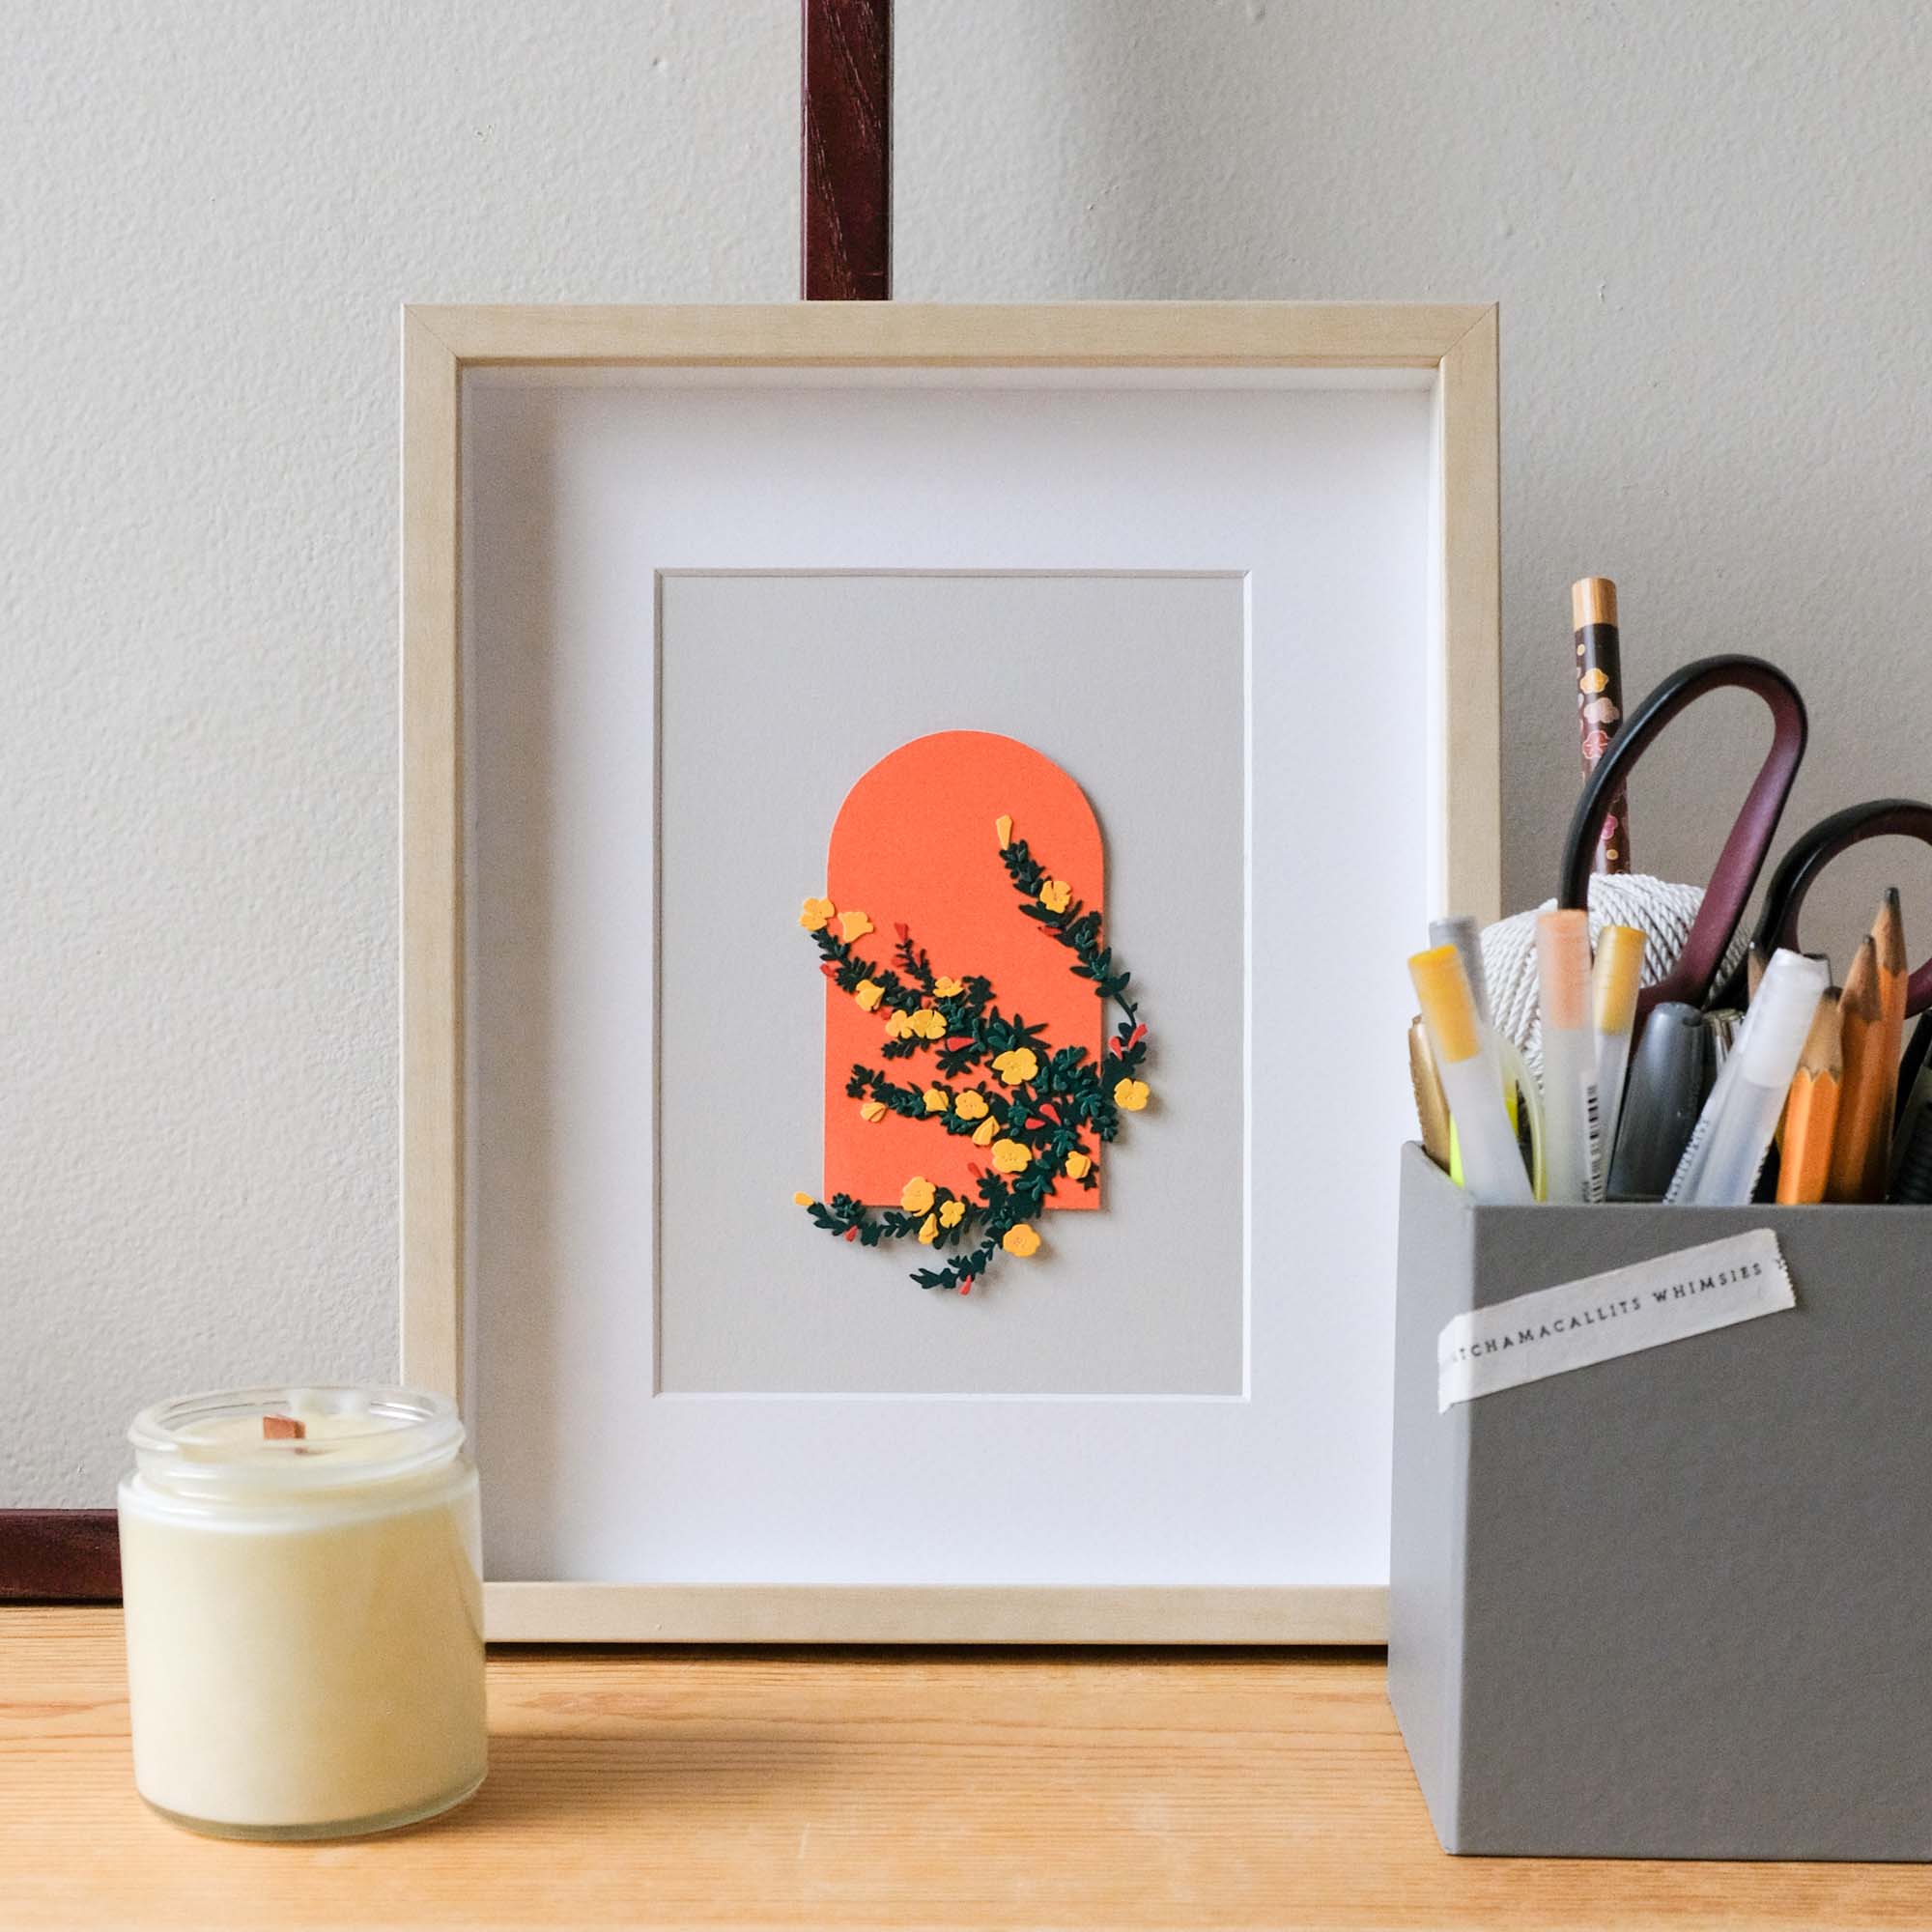 A framed copy of a paper beach primrose sits on a desk with a candle.